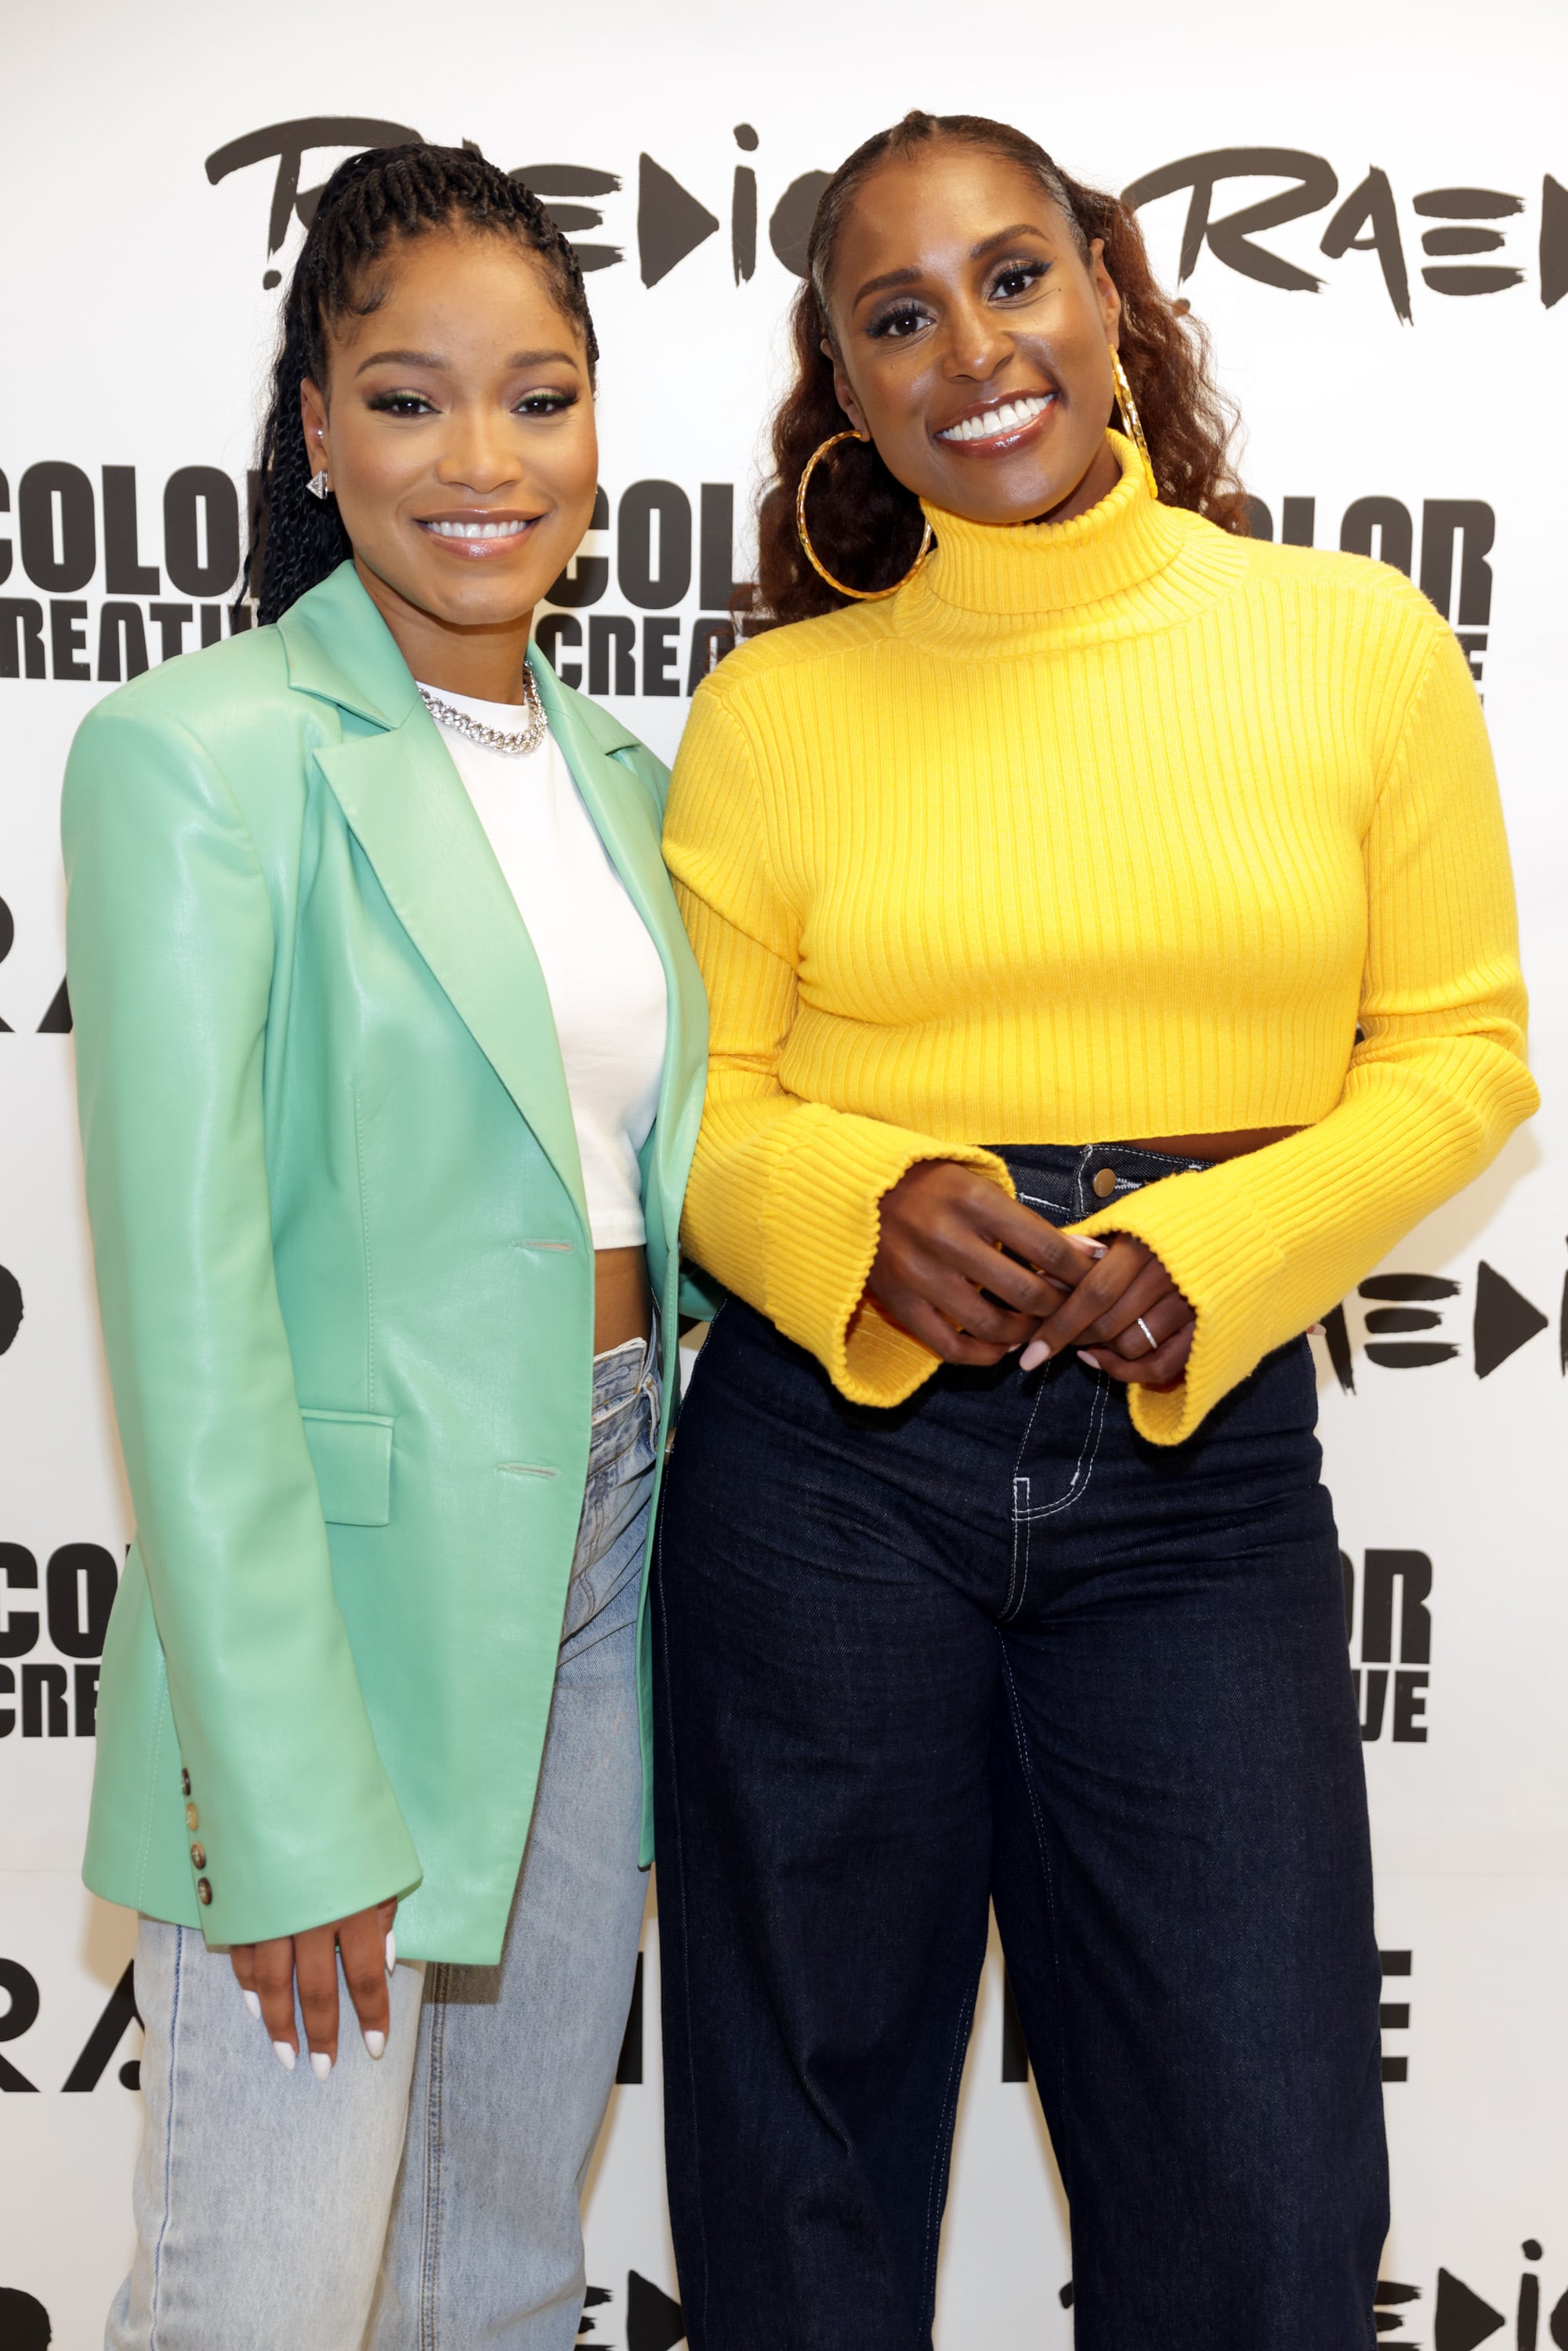 Keke Palmer and Issa Rae during the HOORAE x Kennedy Center Weekend Takeover.